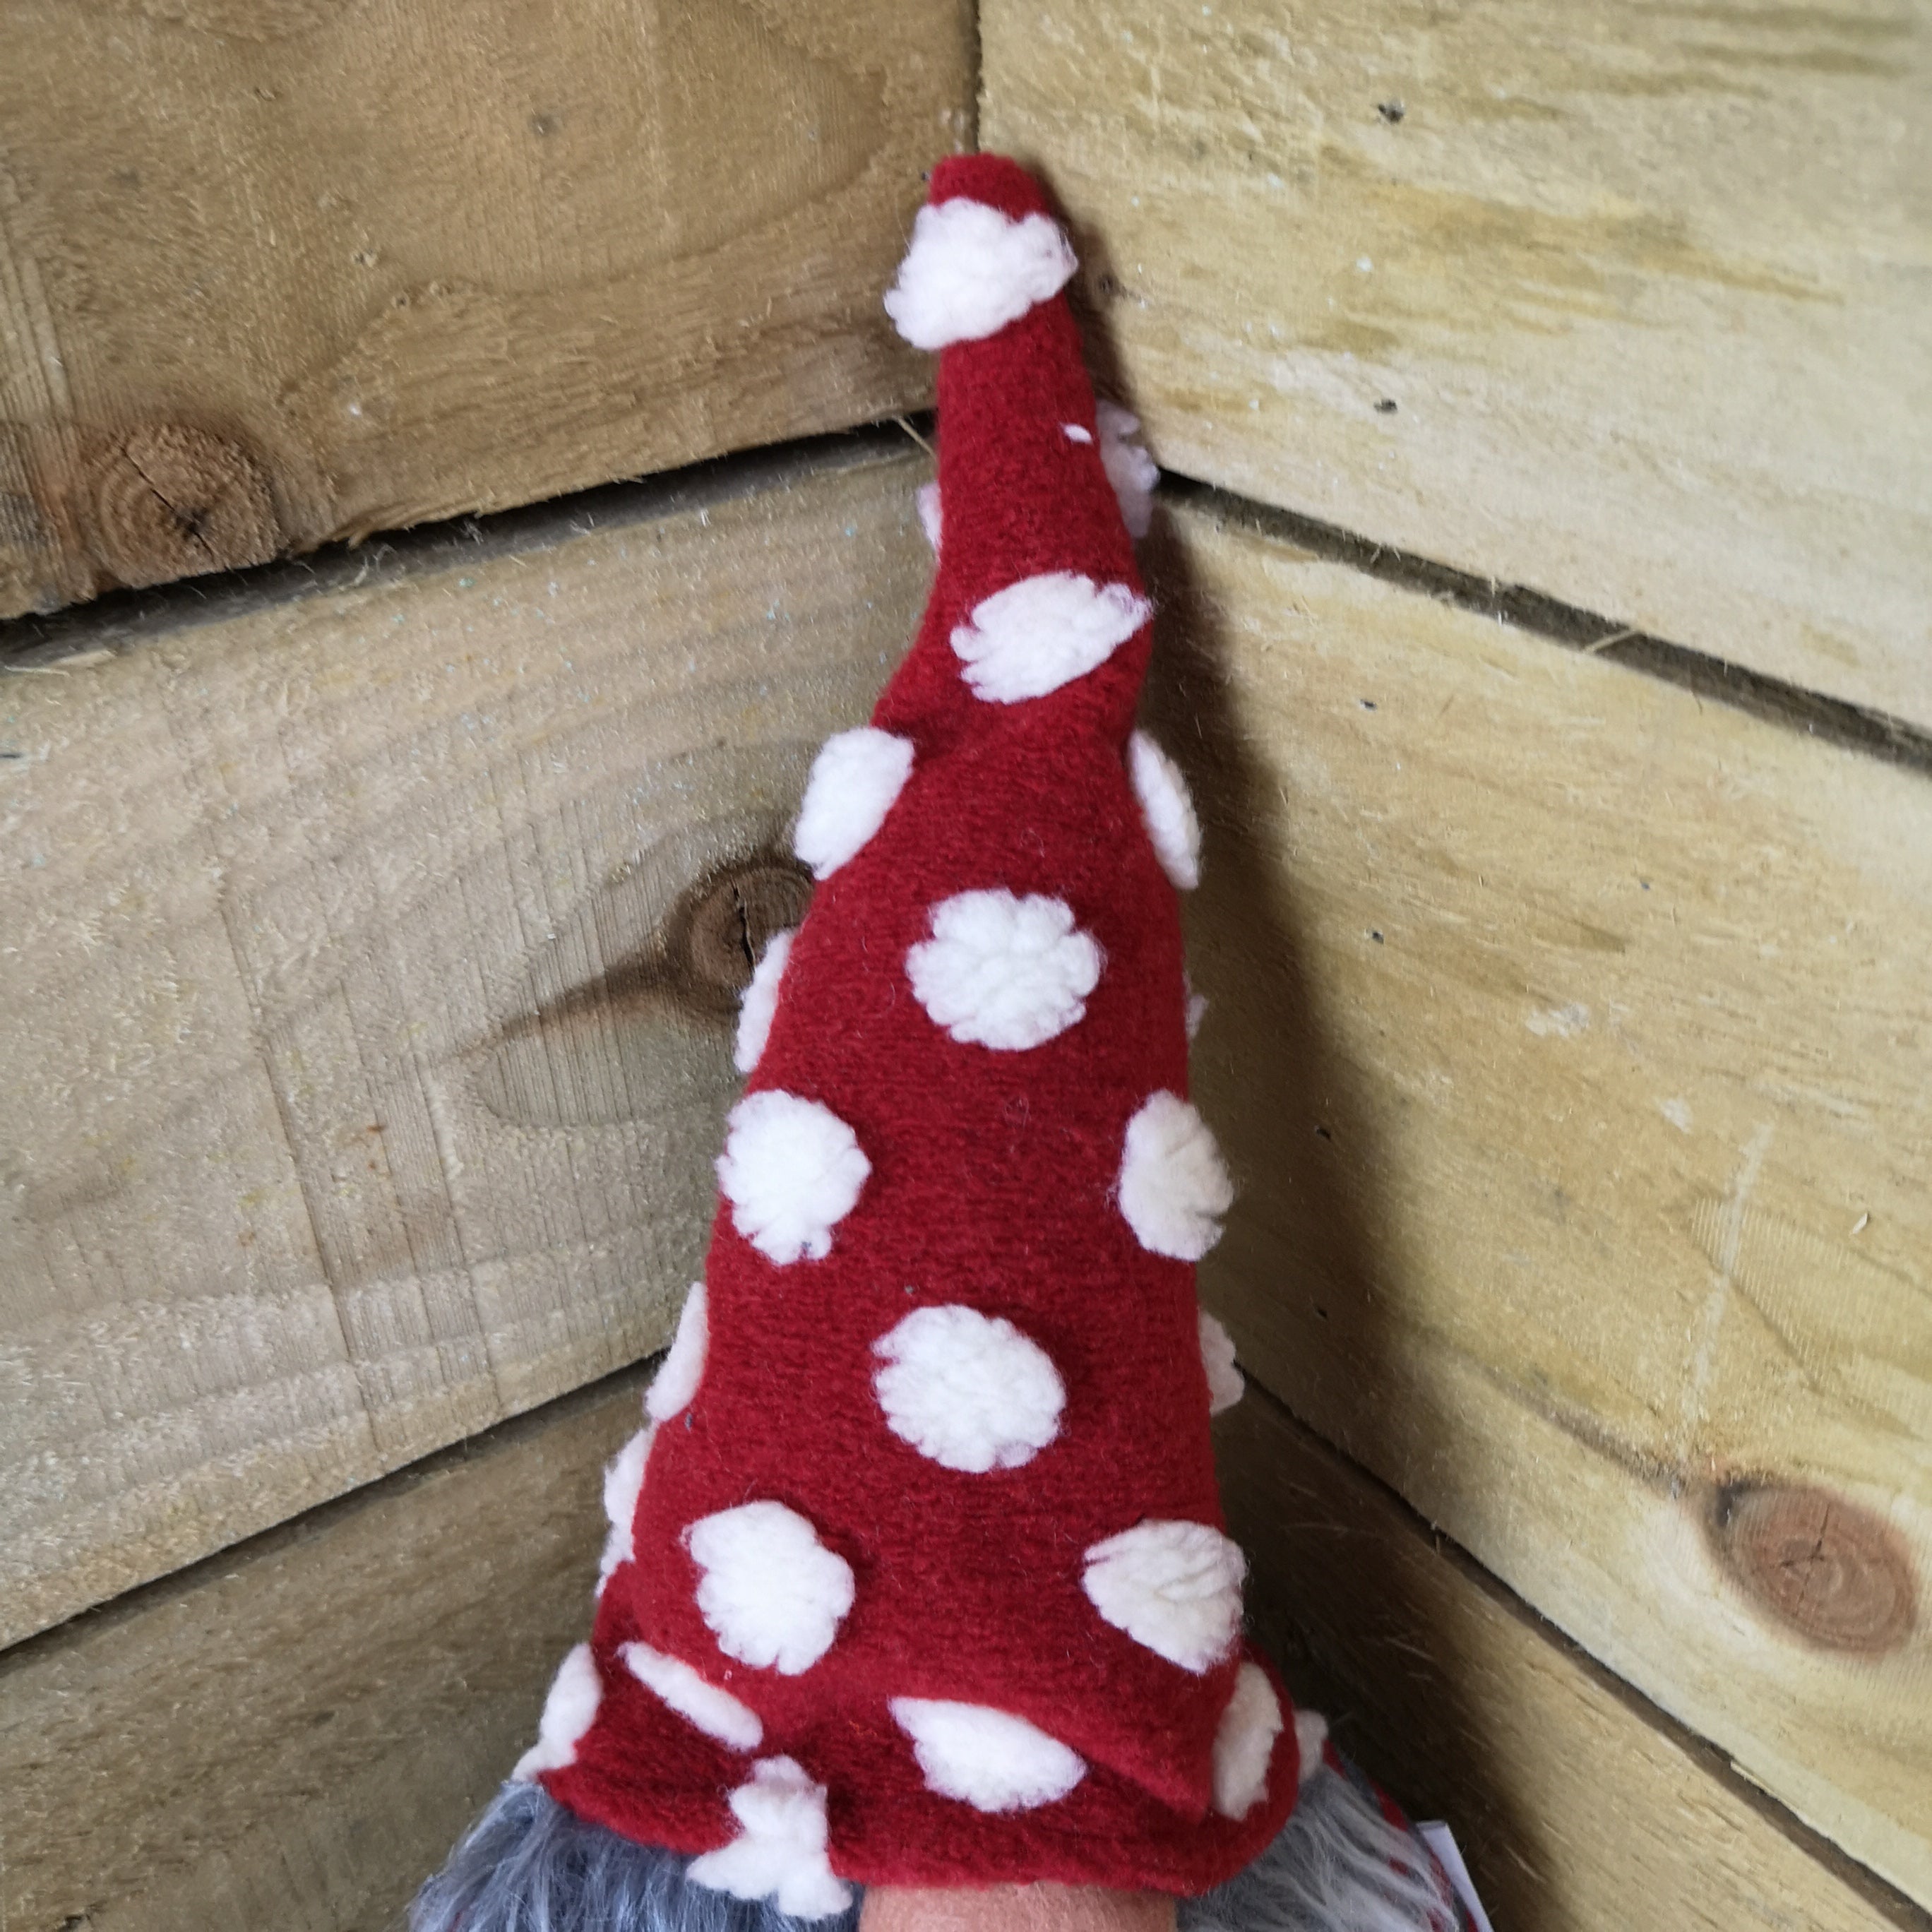 67cm Festive Christmas Gonk with Dangly Legs & Red Polka Dot Hat